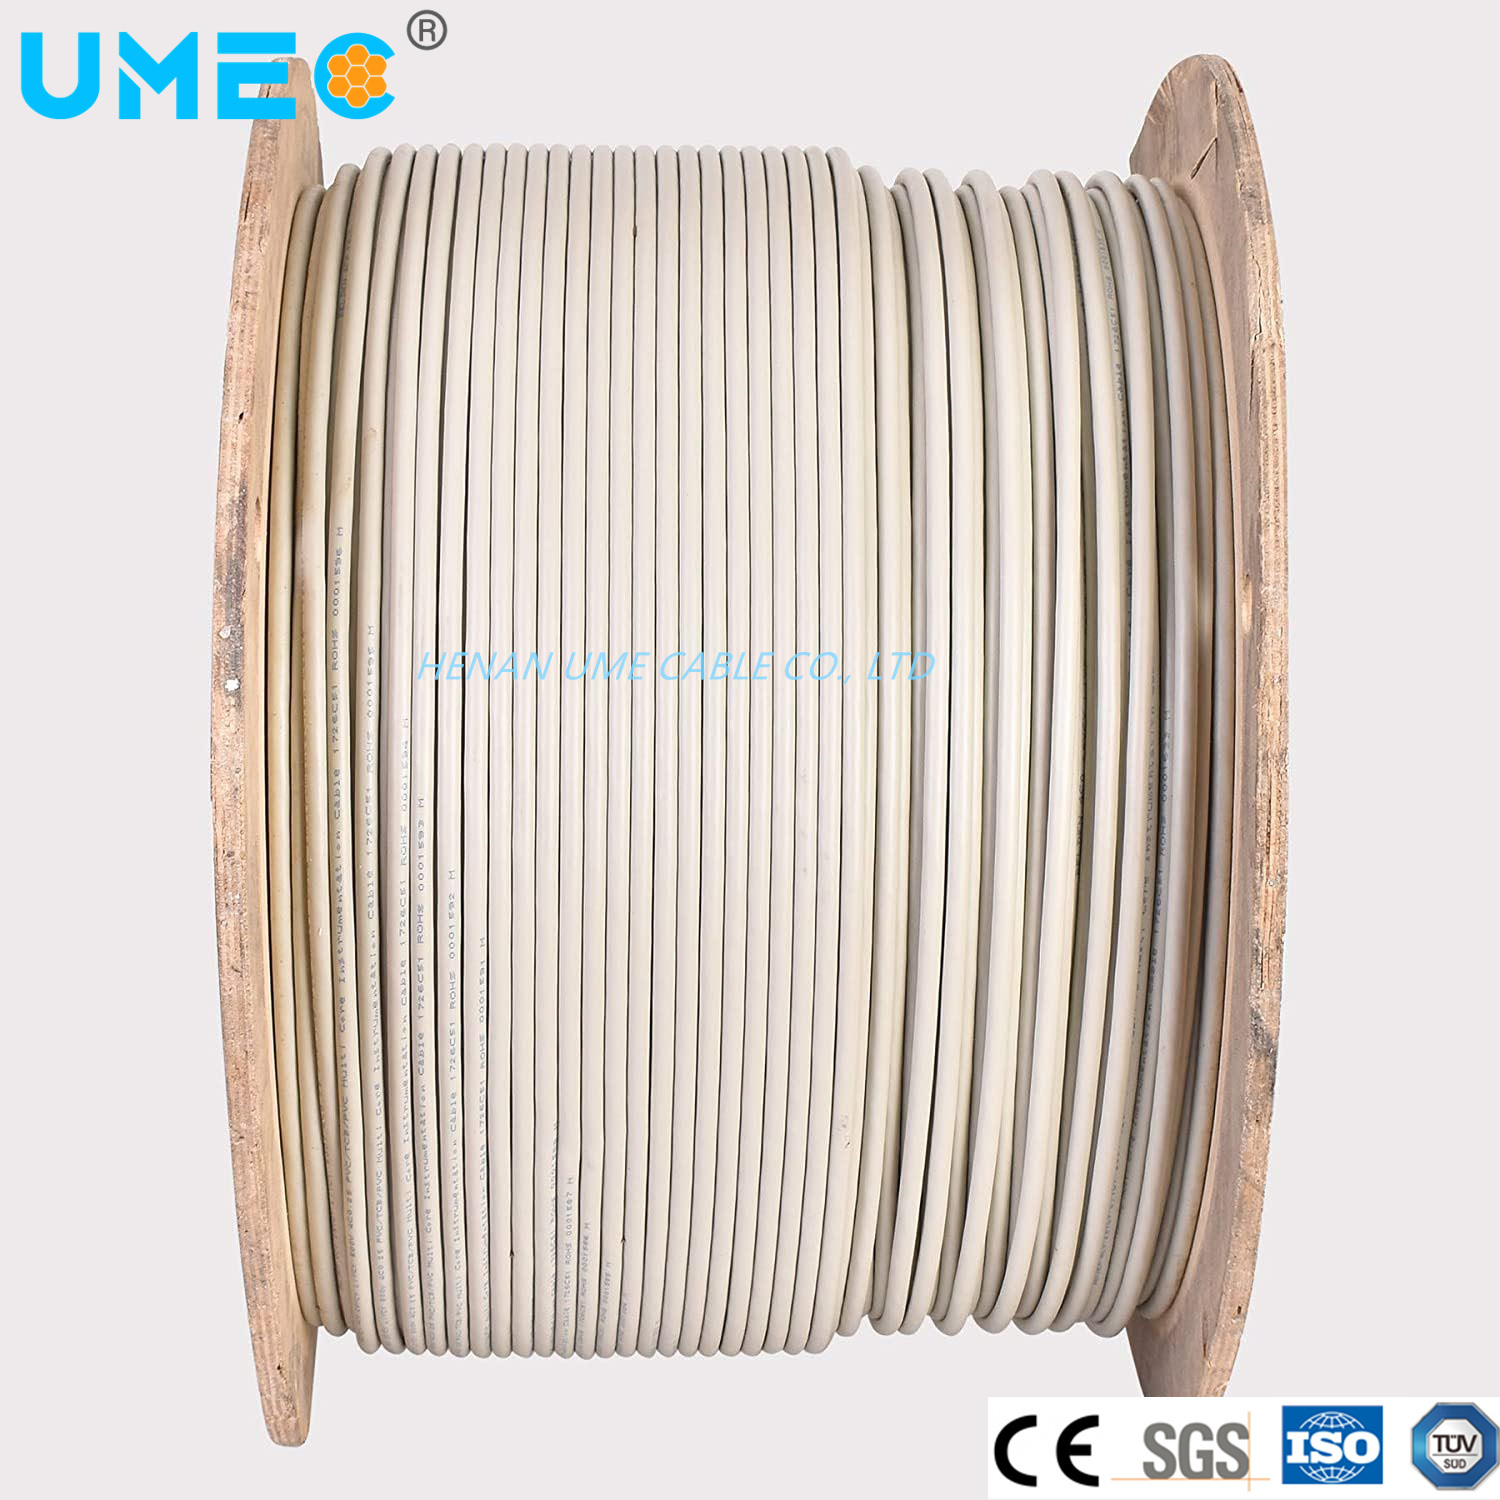 Liycy Shilded Signal and Control Cable Liycy Cable